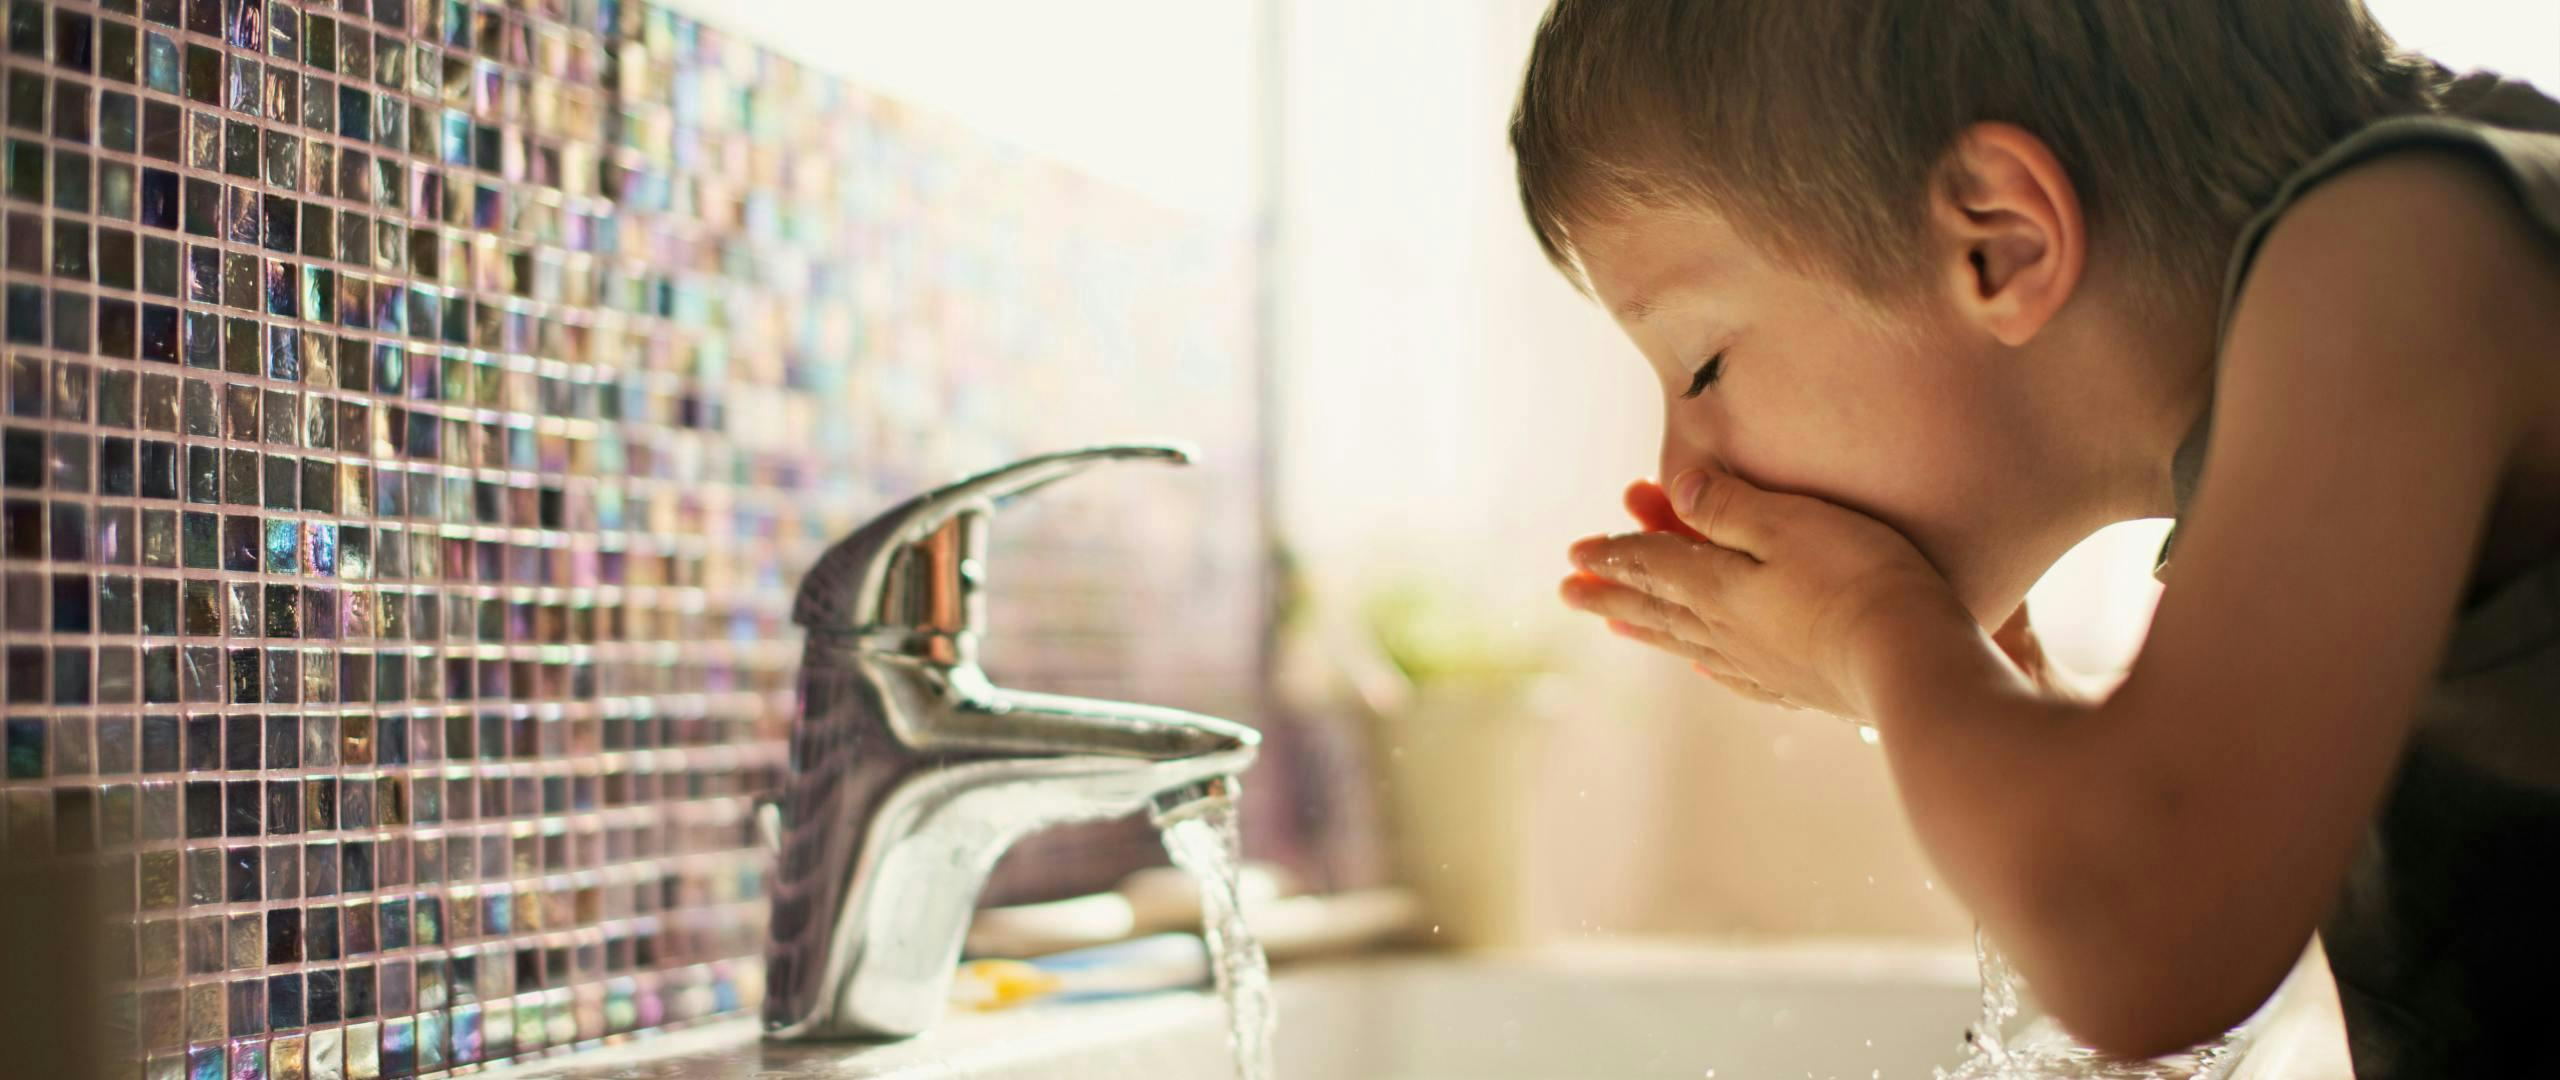 Child Drinking Tap Water | Tap Water Facts Safety